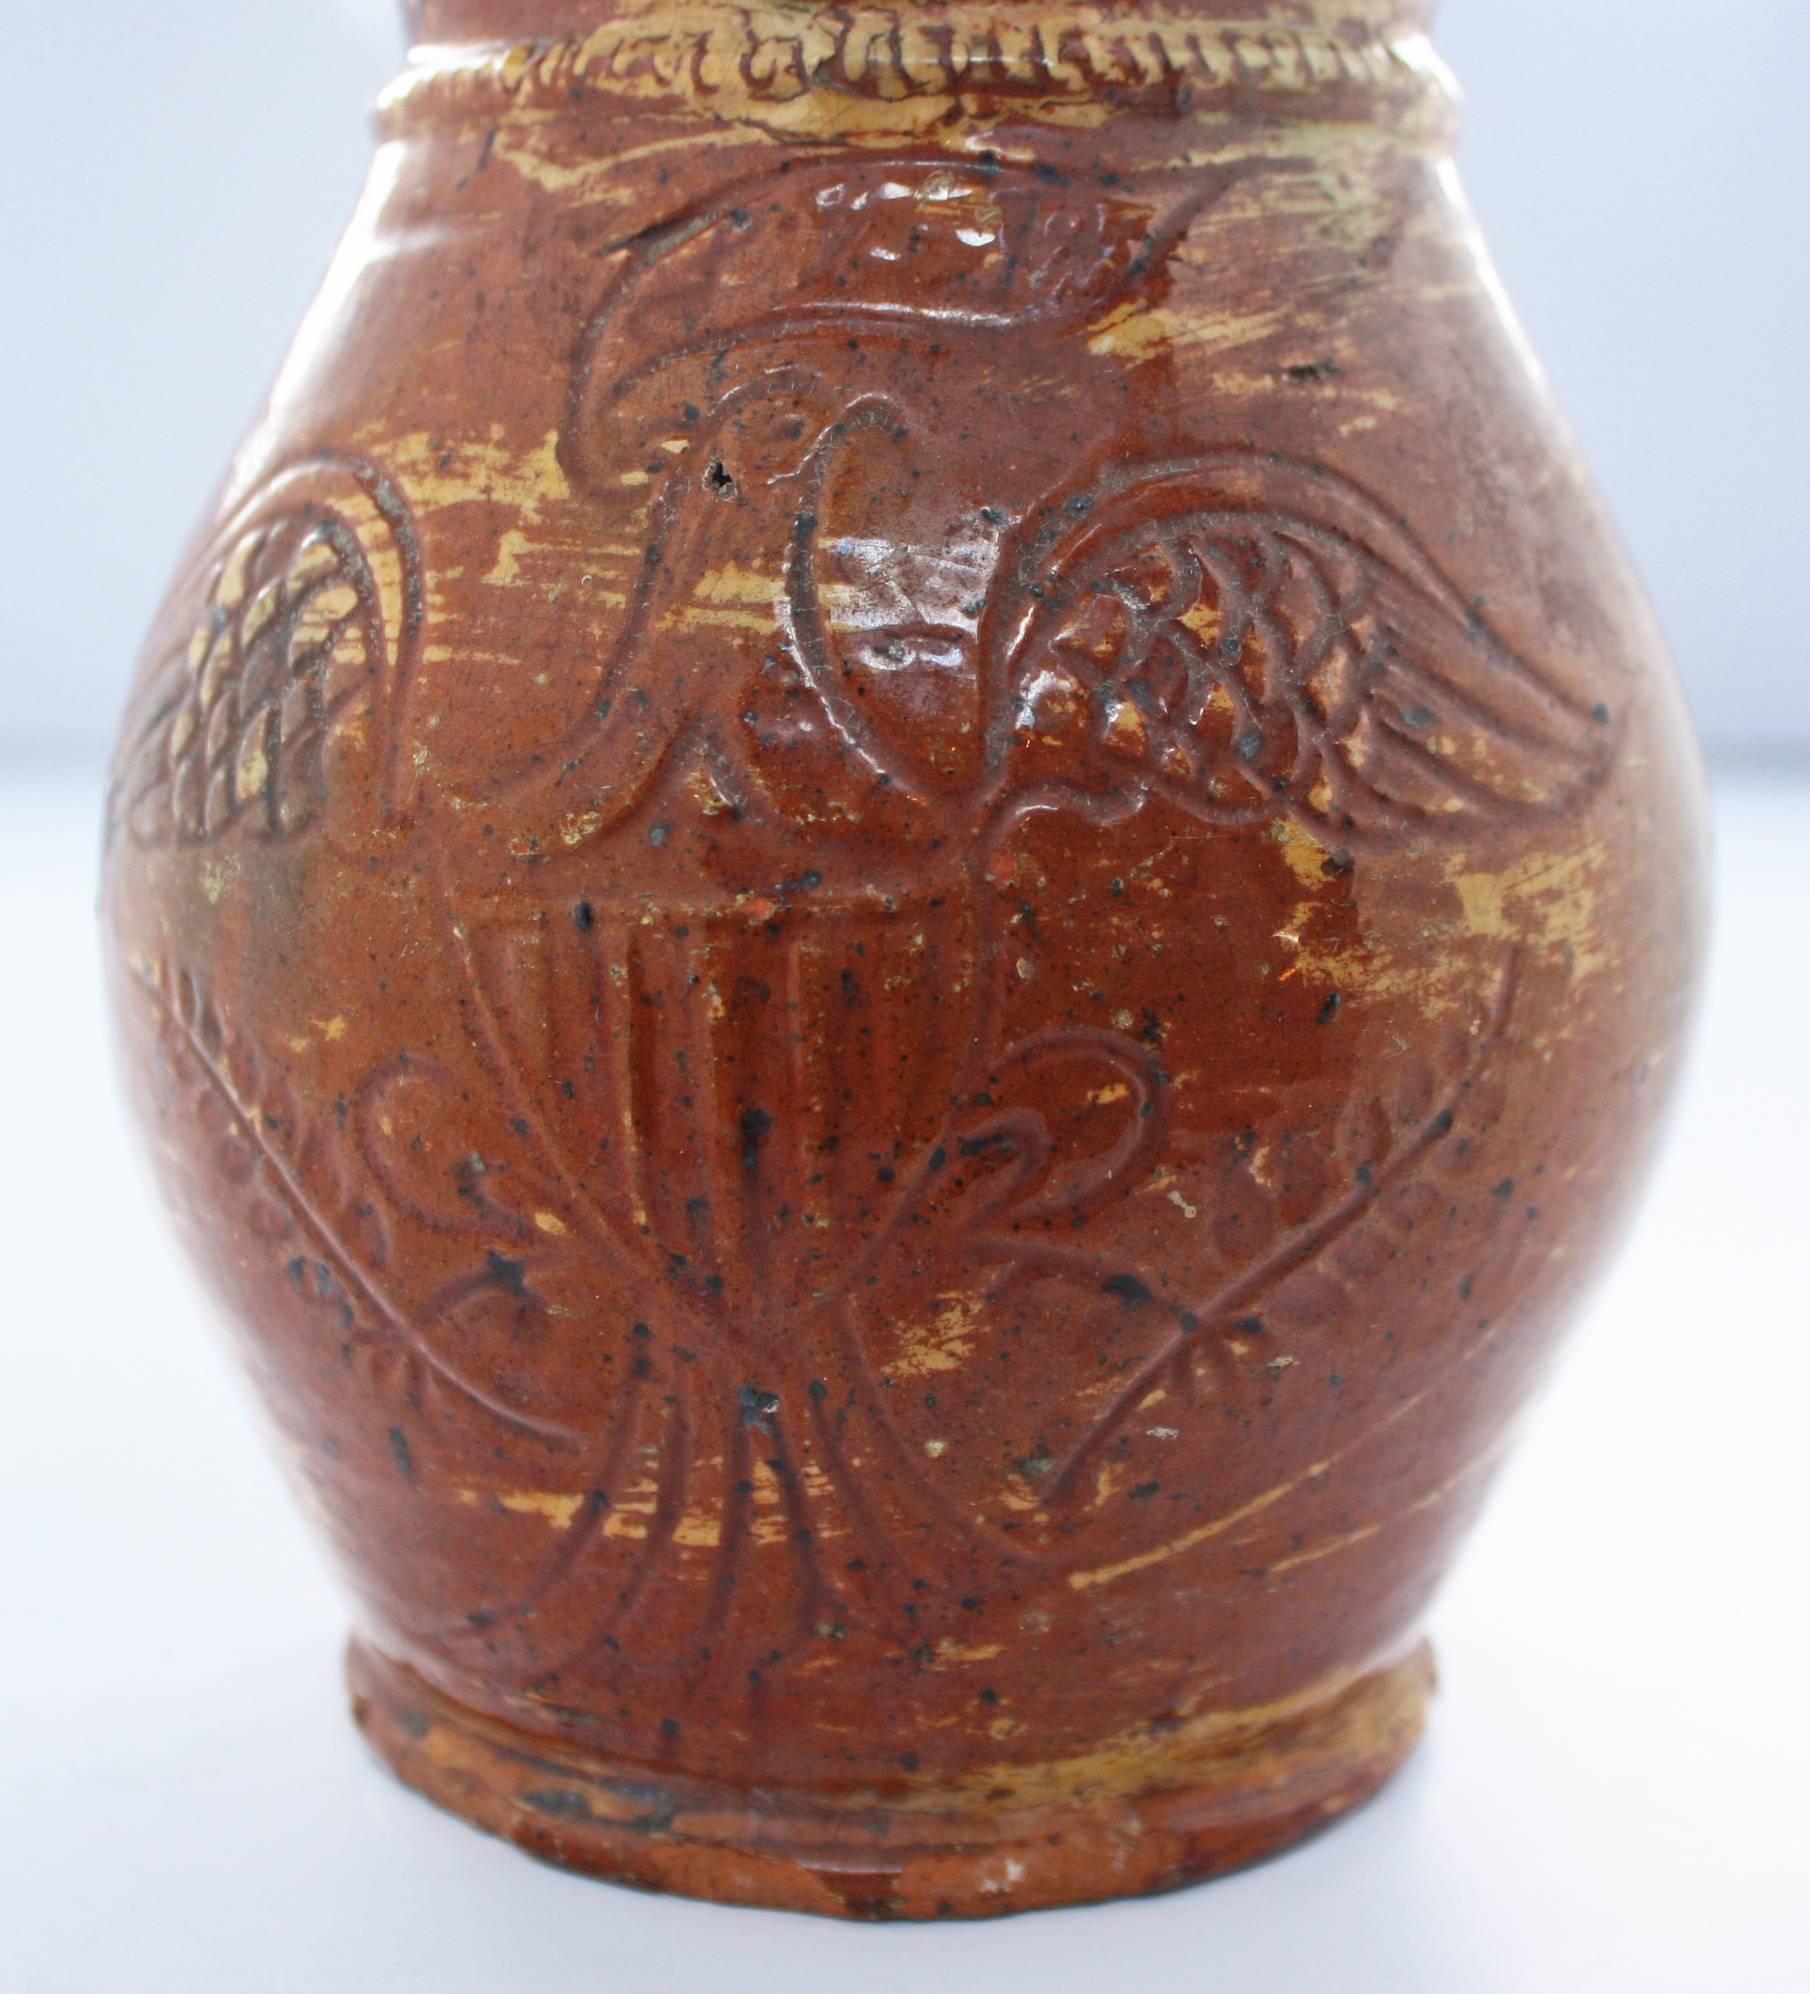 A glazed ovoid form red ware pitcher with rounded foot, ribbed handle and coggled bead below collar, decorated with a finely-incised Federal Eagle holding olive branches in its talons and a banner in its beak. Surface decorated with drips of